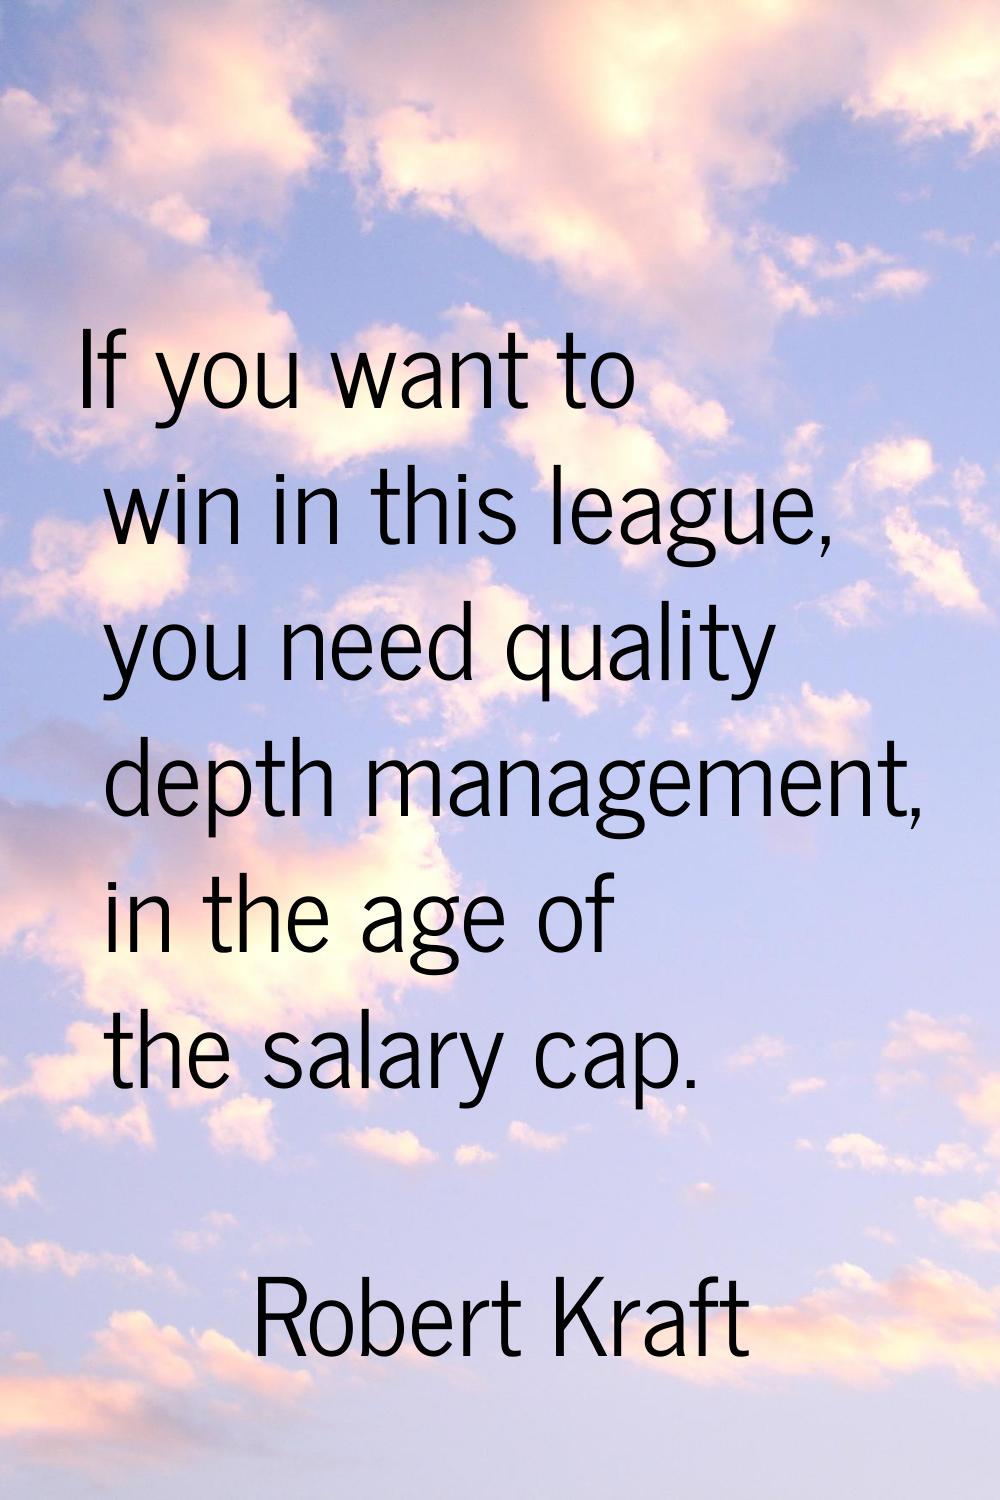 If you want to win in this league, you need quality depth management, in the age of the salary cap.